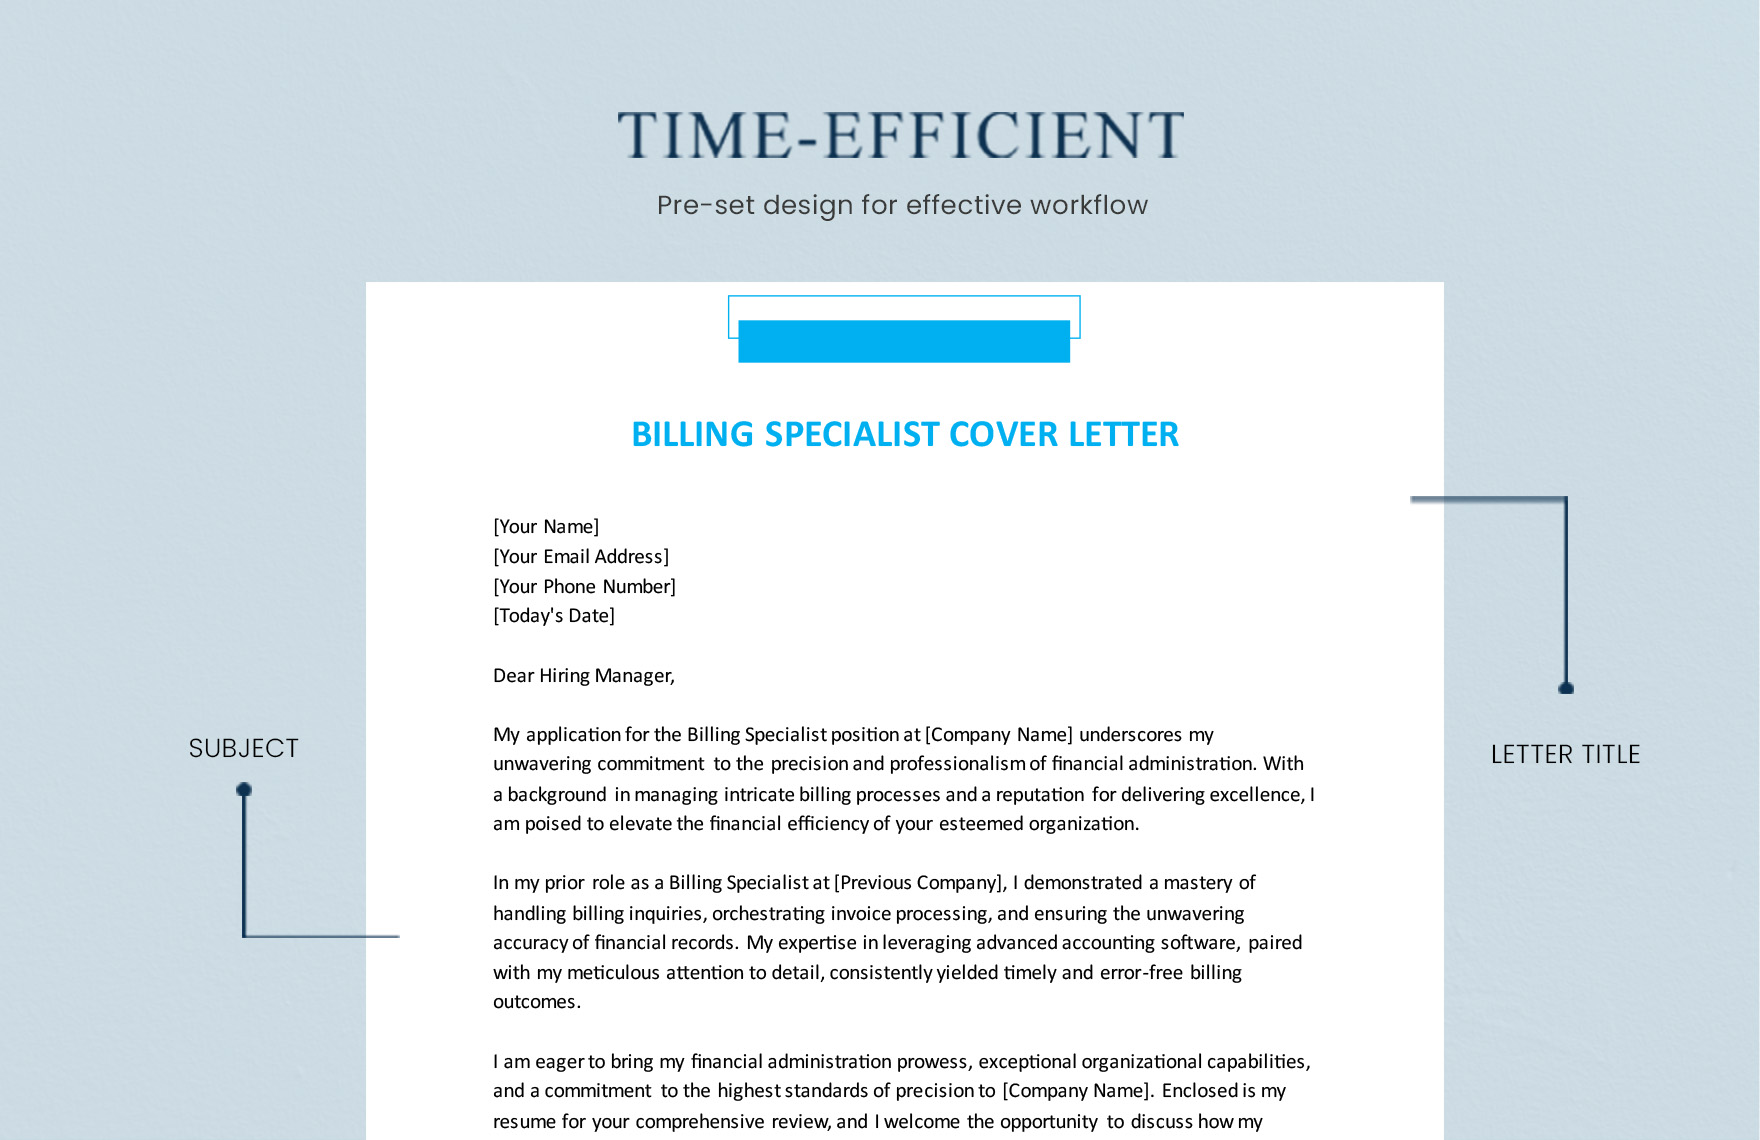 Billing Specialist Cover Letter